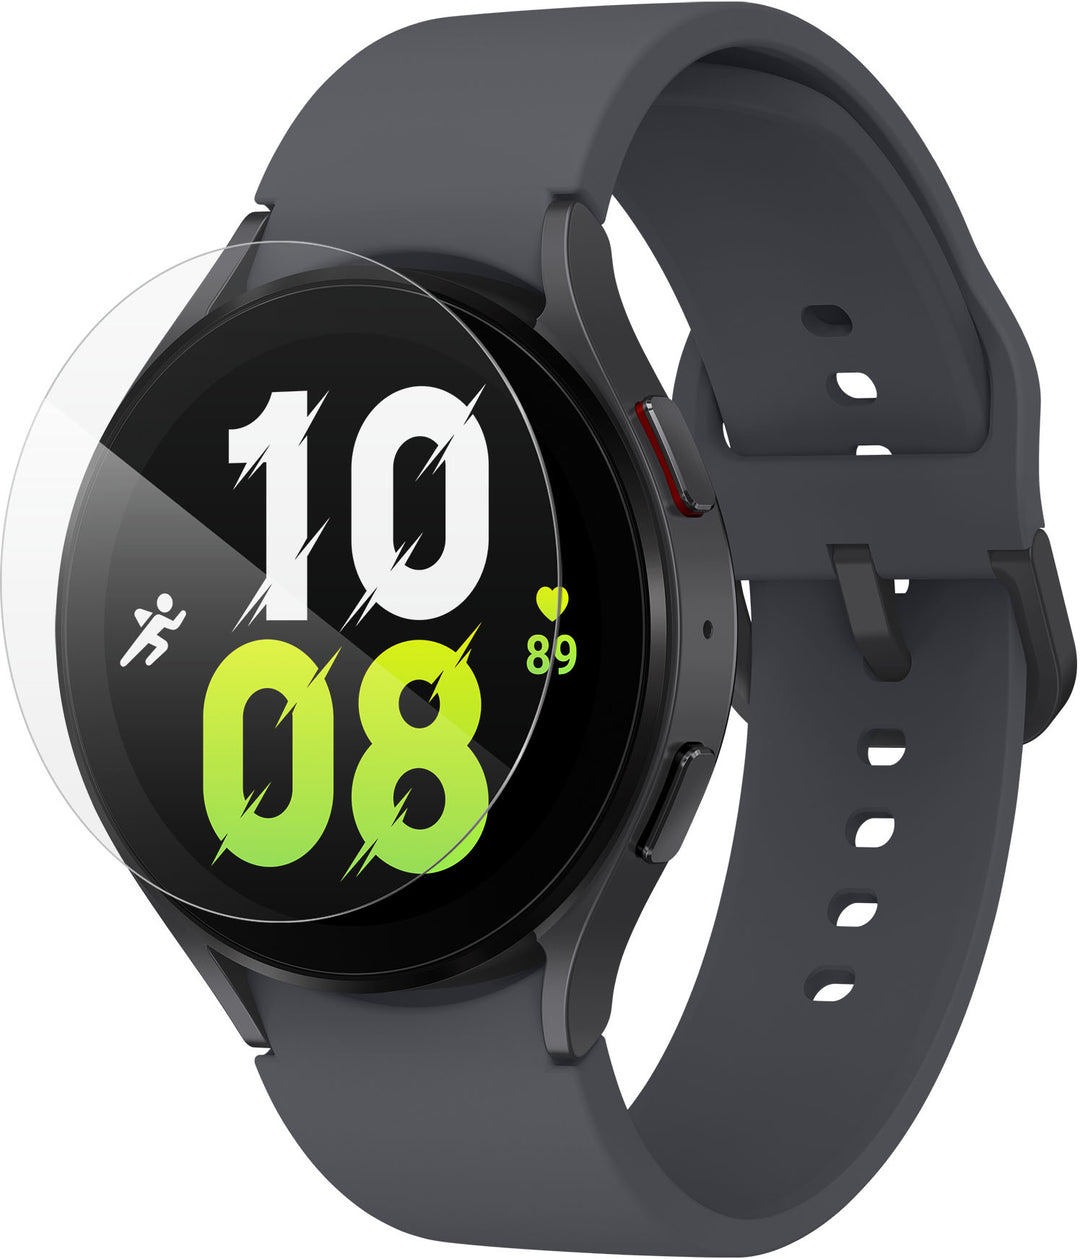 ZAGG - InvisibleShield GlassFusion+ Flexible Hybrid Screen Protector for Samsung Galaxy Watch5 2022 (Large)_1